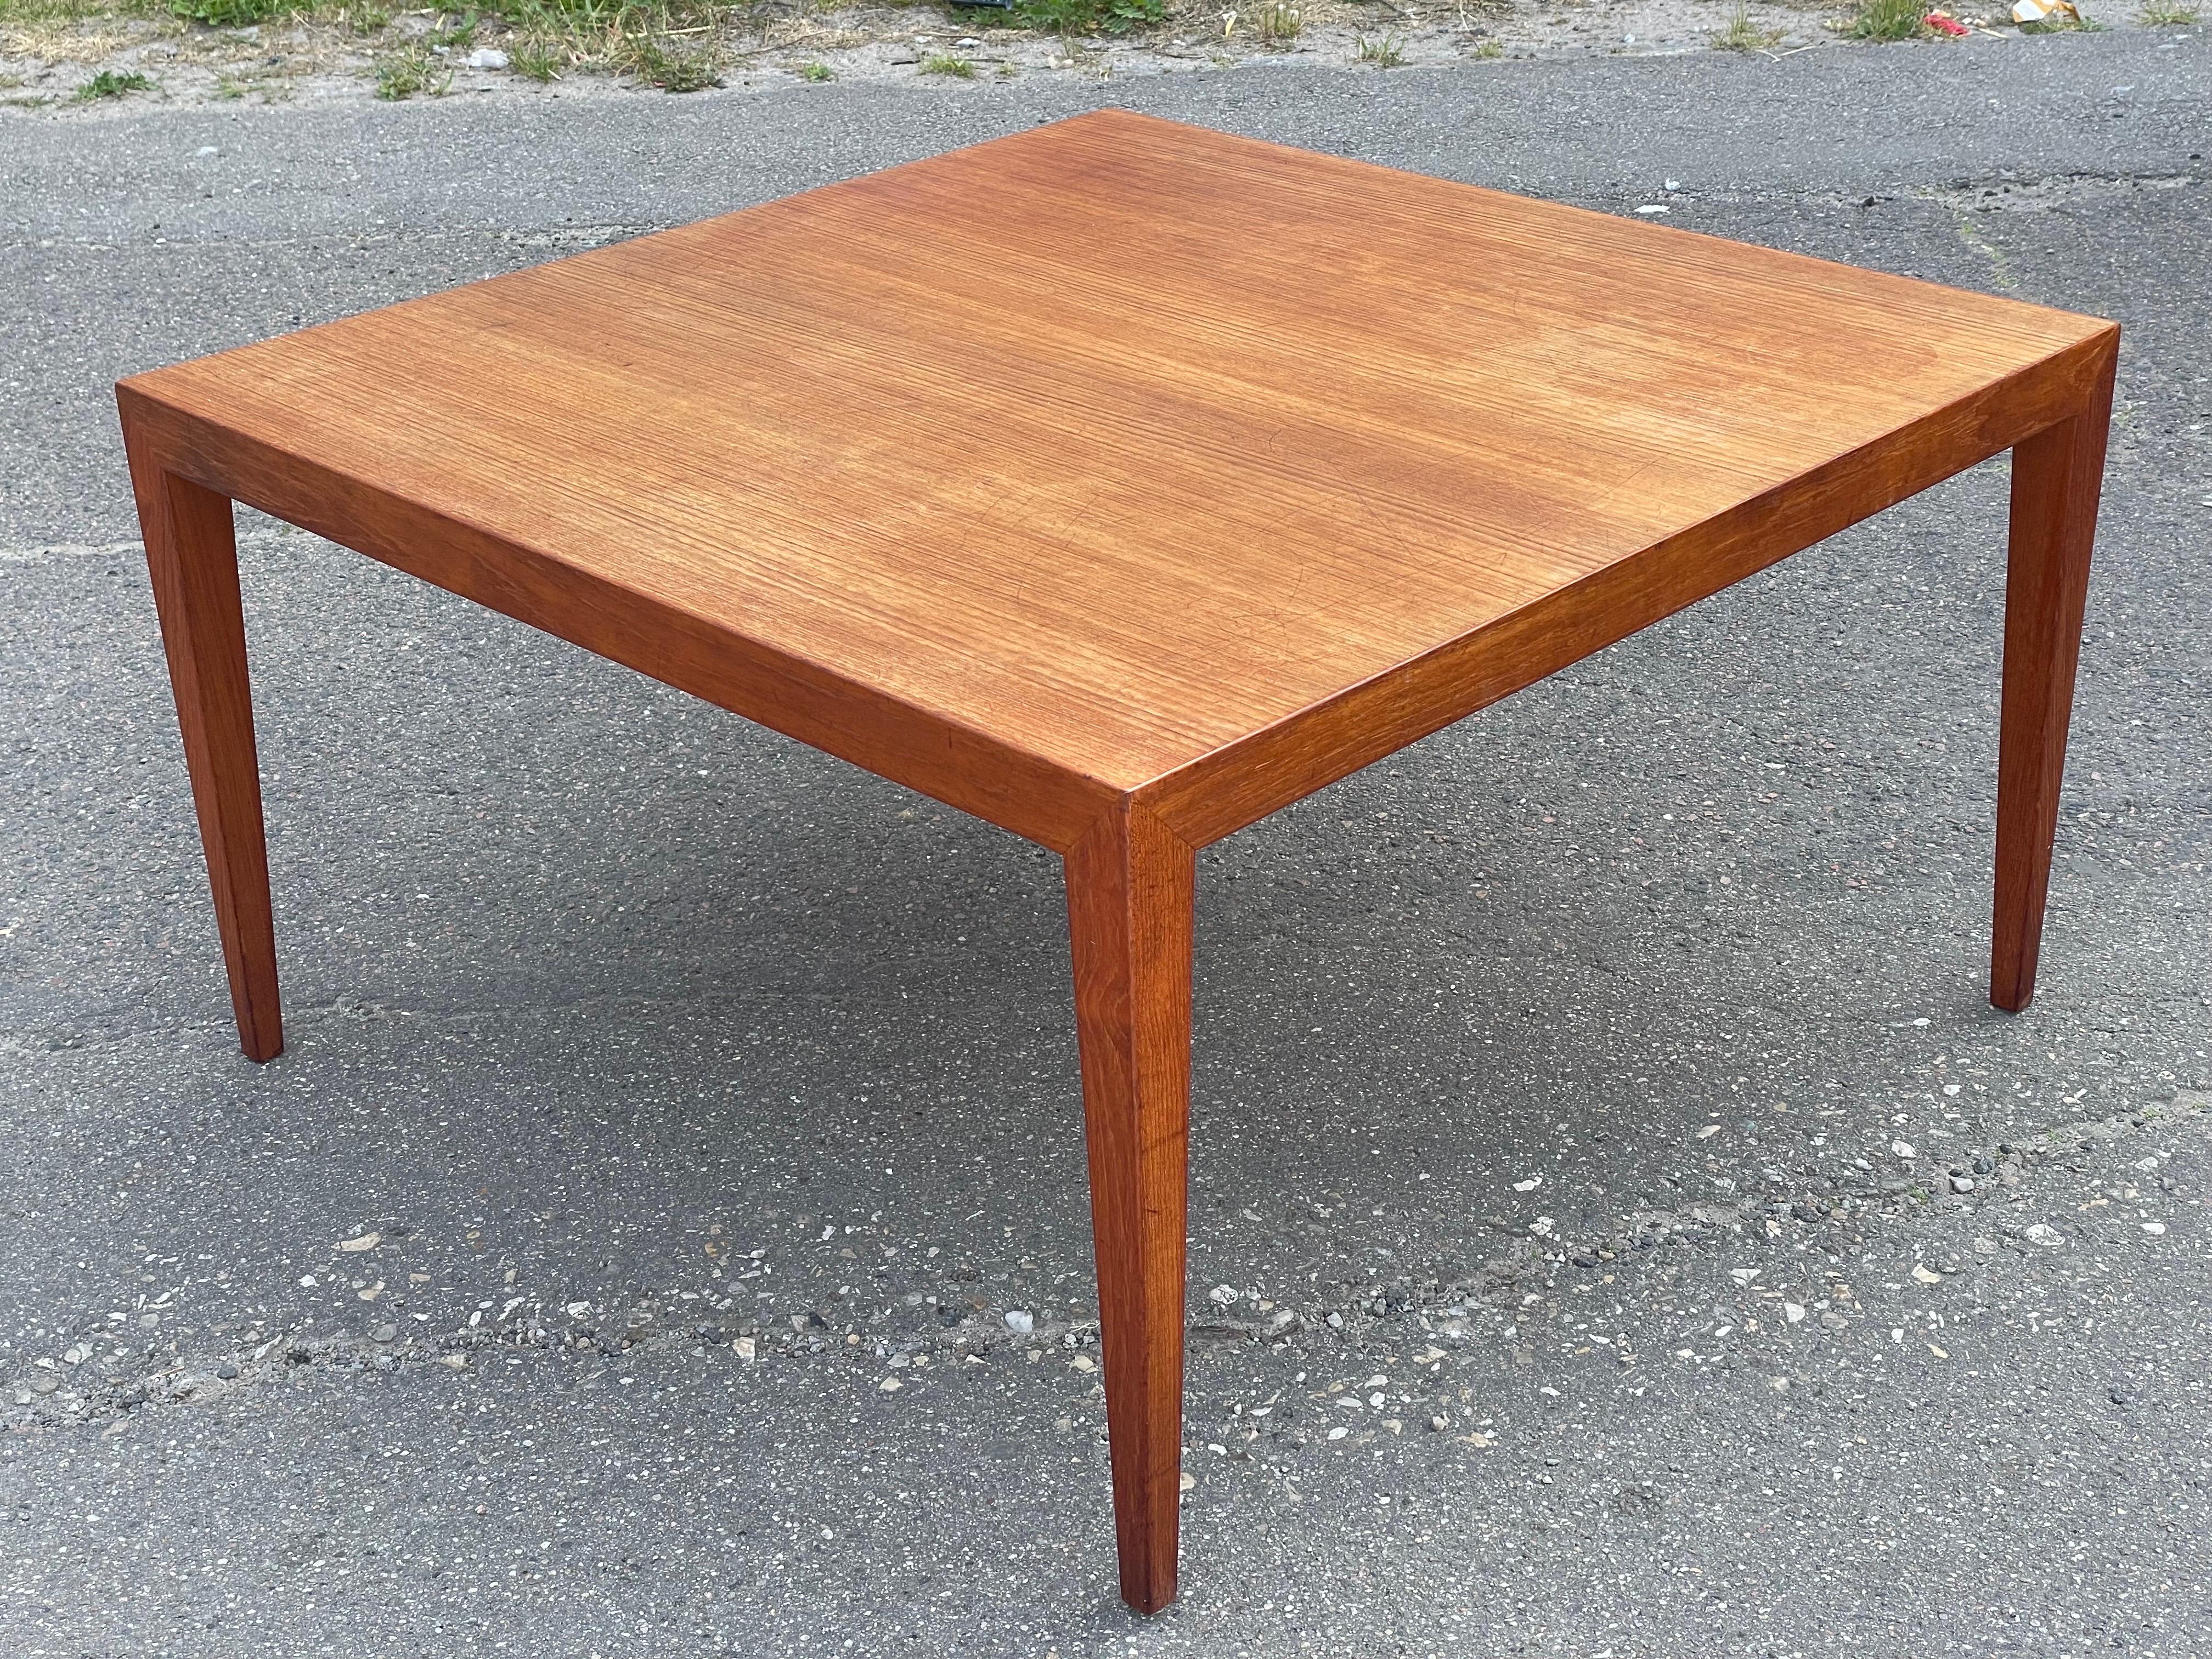 An exquisite midcentury masterpiece: a teak coffee table designed by Severin Hansen and expertly crafted by Haslev Mobelsnedkeri, circa 1955. This stunning piece stands on elegant tapered legs, showcasing the epitome of Danish craftsmanship. The